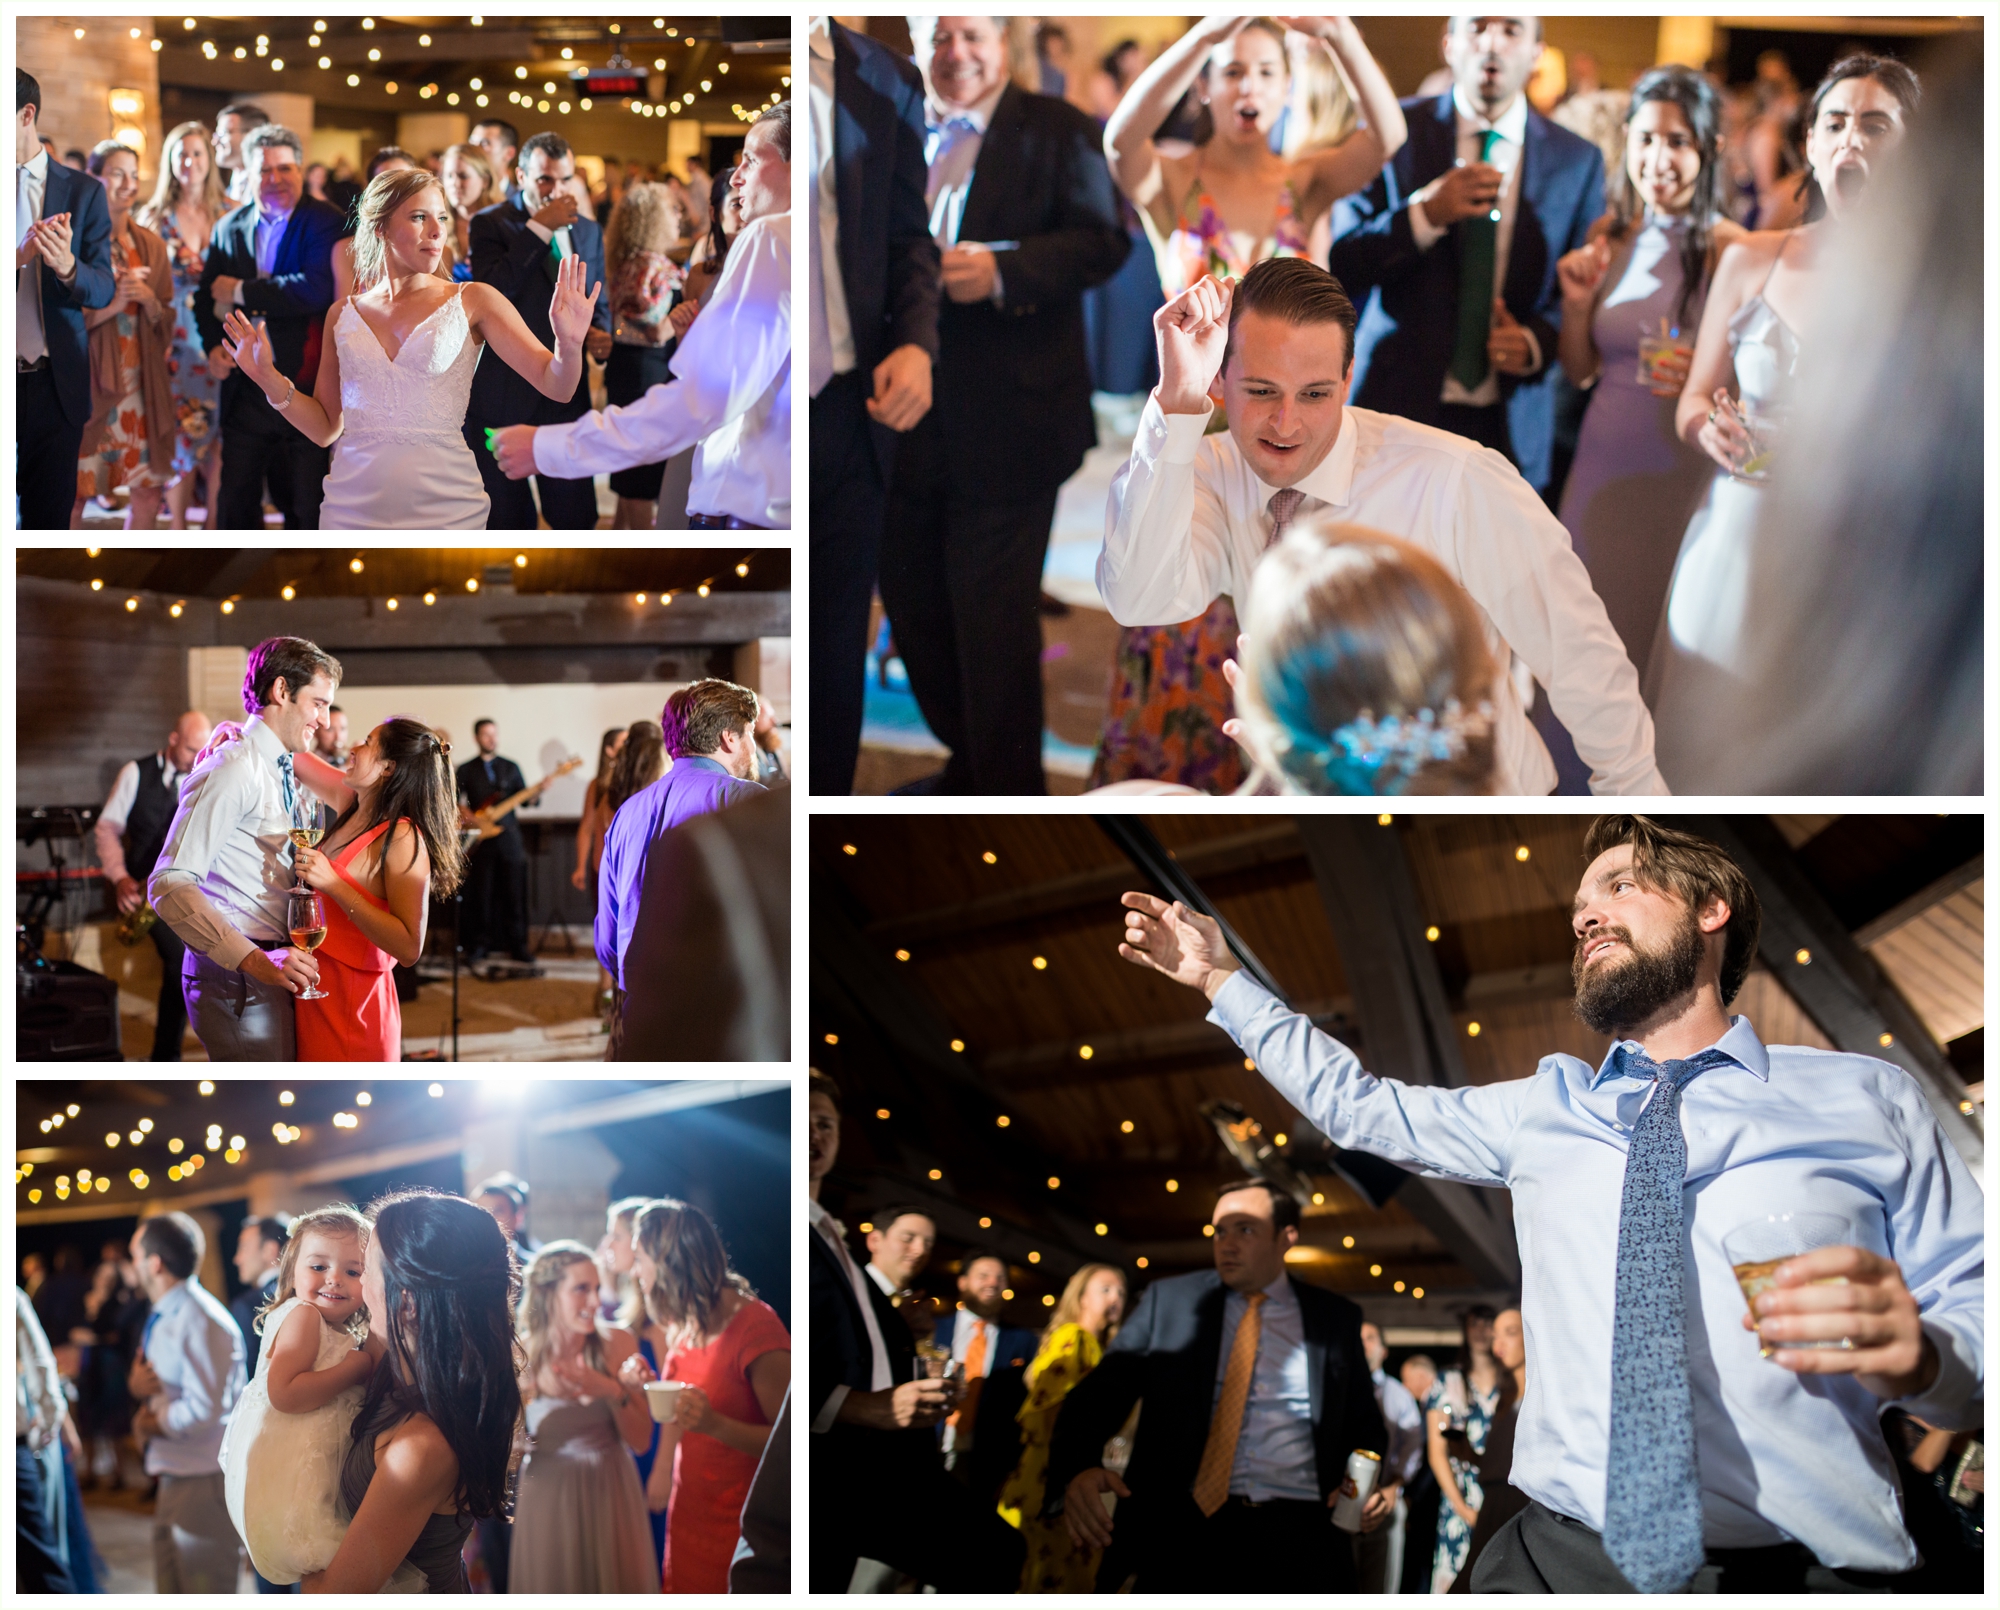 candids of guests dancing during wedding reception